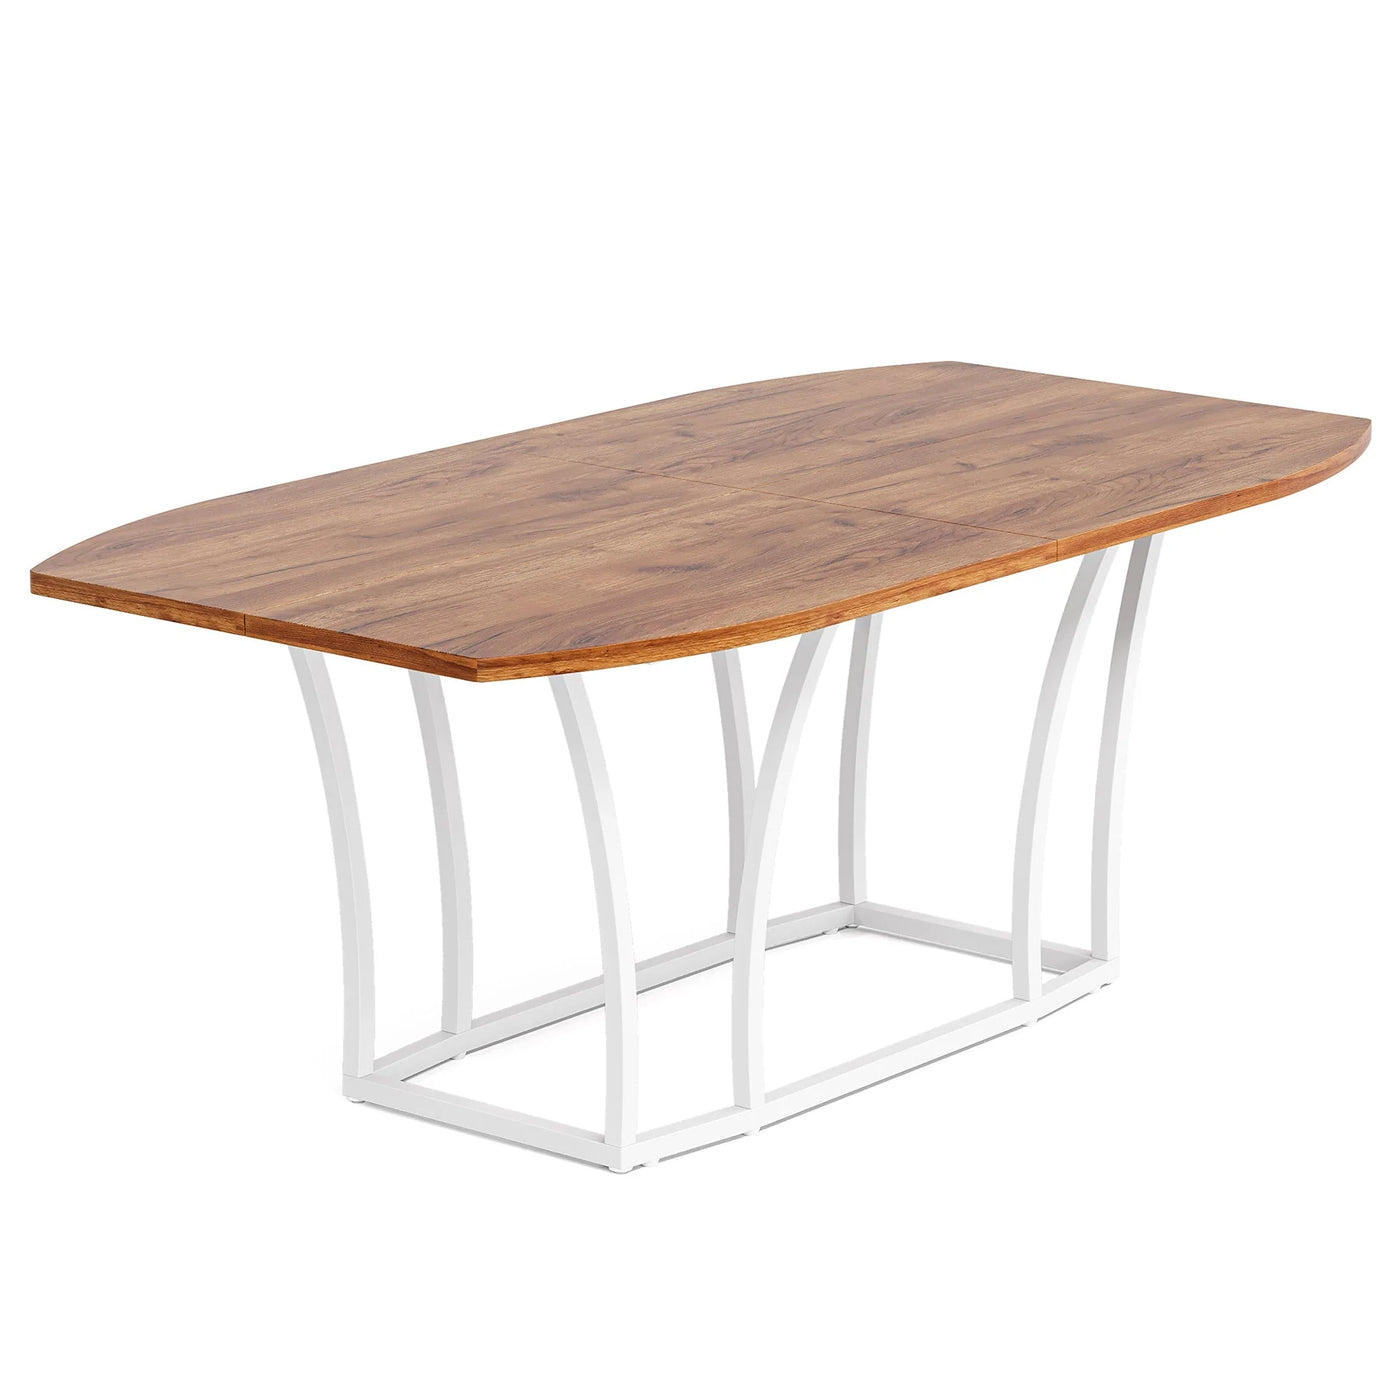 Monserrat 70.87" Oval Wood Rectangular White Brown Dining Table Kitchen Table with Metal Legs